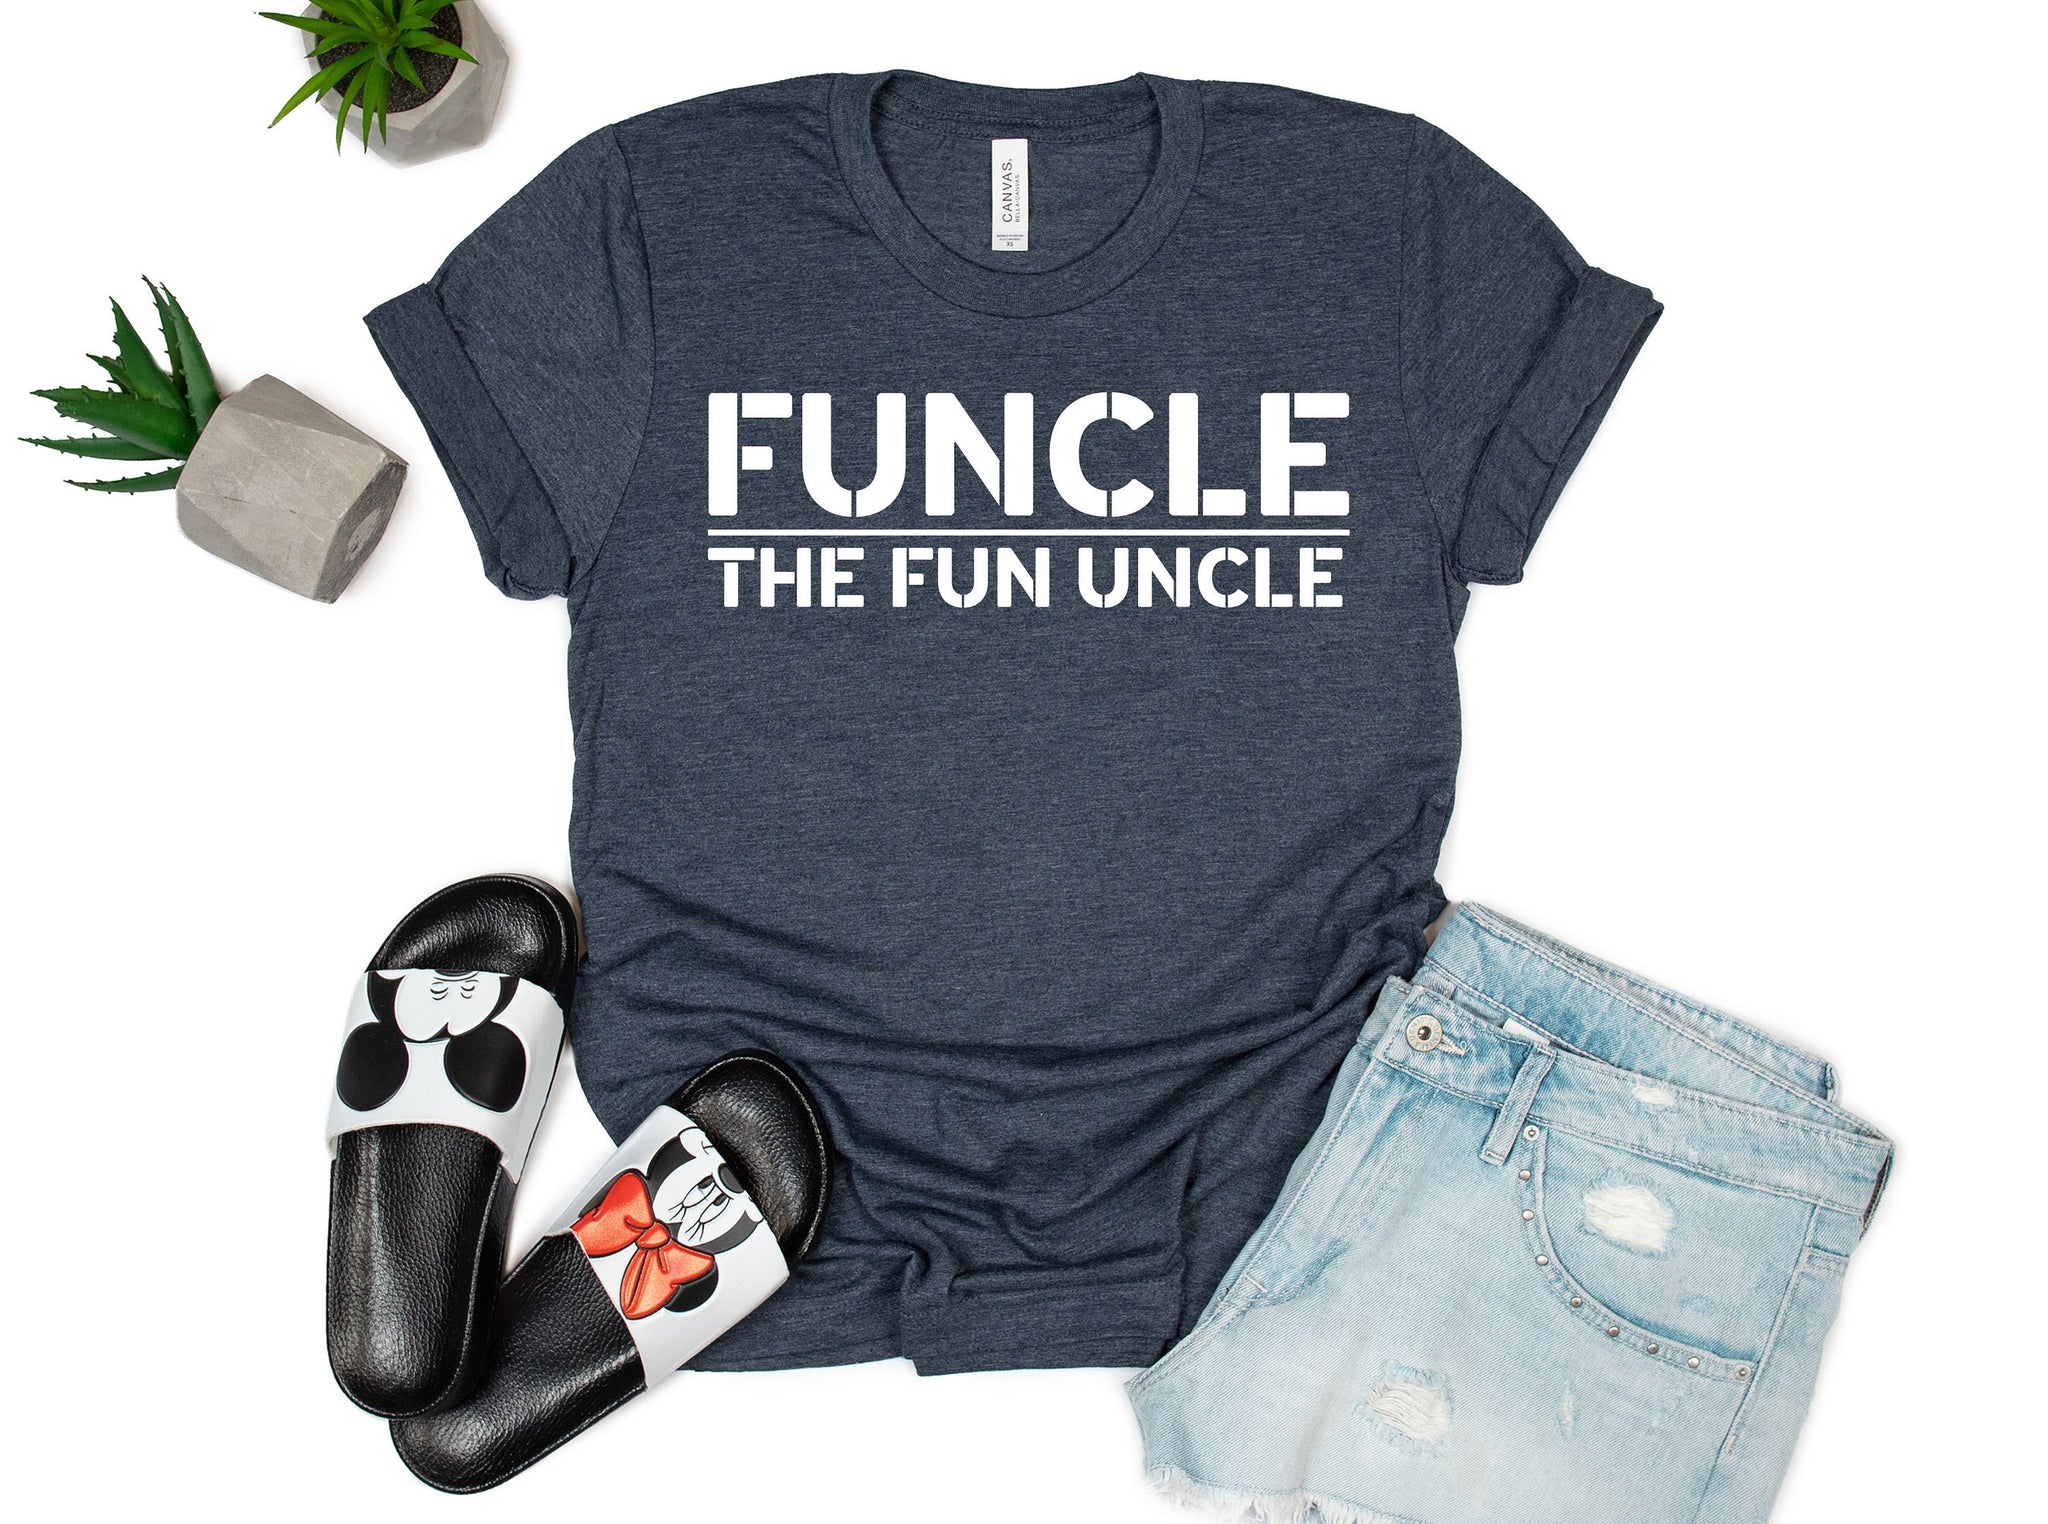 Funcle Shirt, Shirt For Uncles, Funny Uncle Shirt, Best Uncle Shirt, Uncle Shirt, Like a Father Shirt, Uncle Birthday Outfit